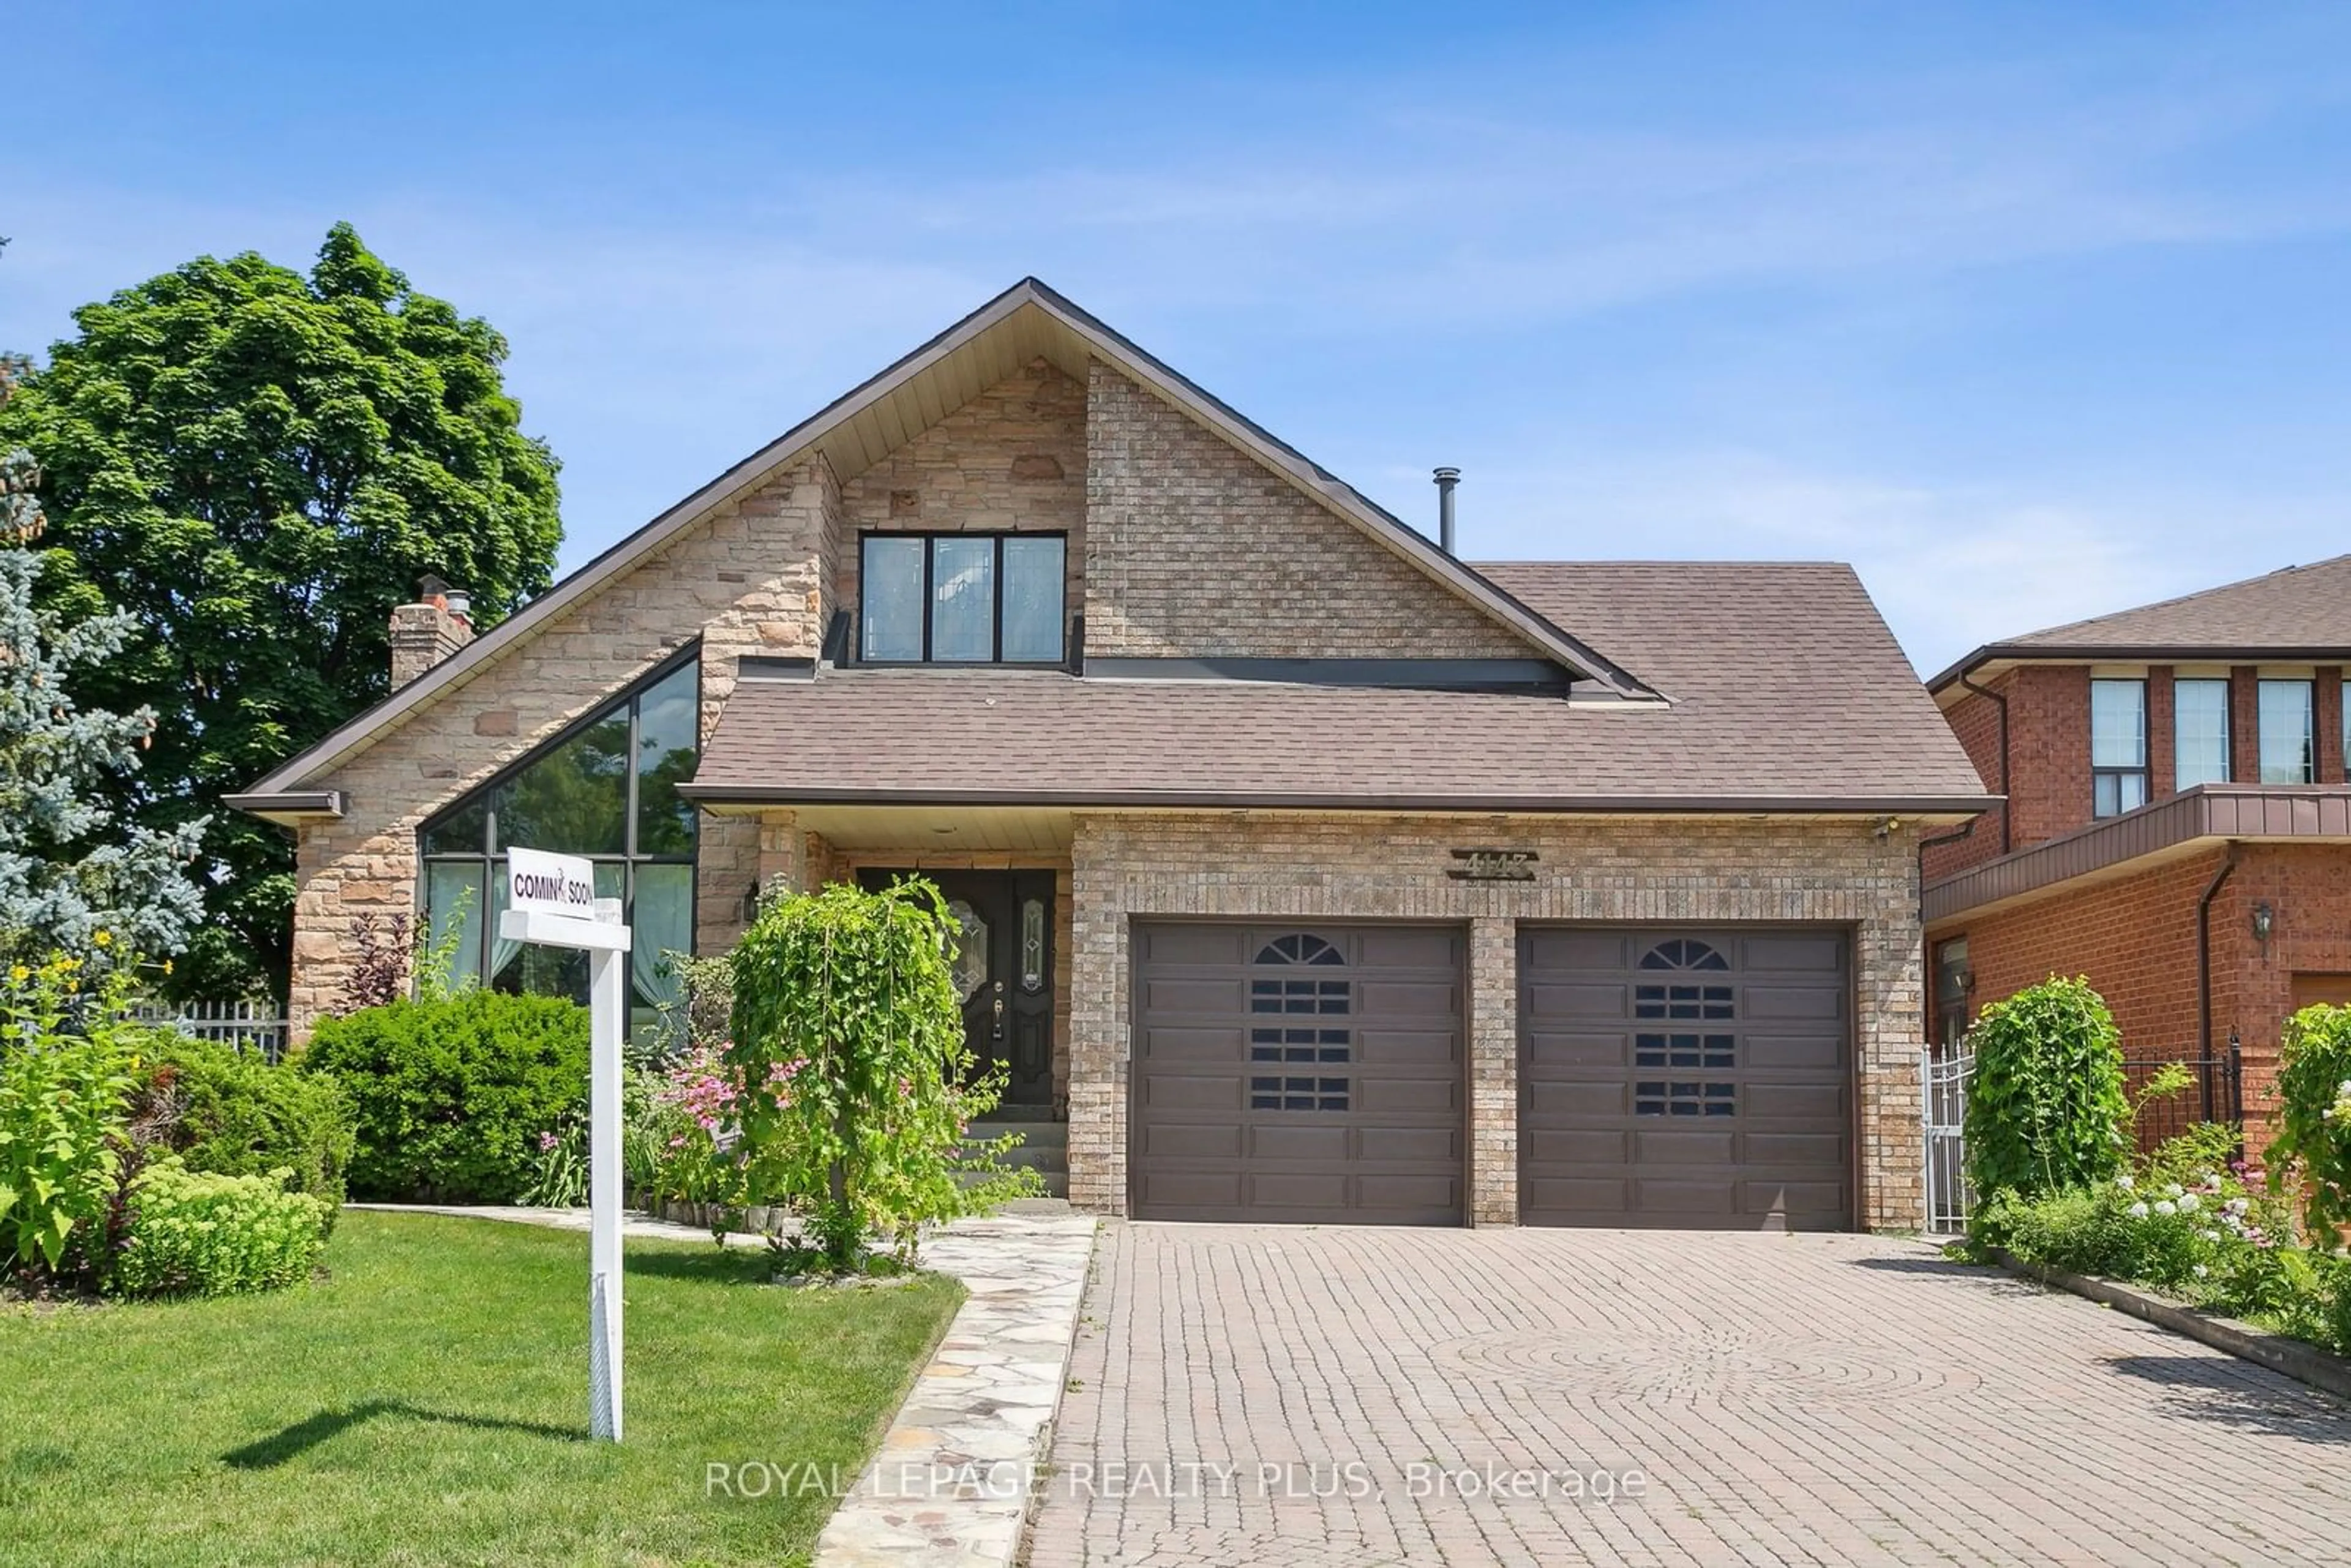 Home with brick exterior material for 4143 Tapestry Tr, Mississauga Ontario L4W 4E4